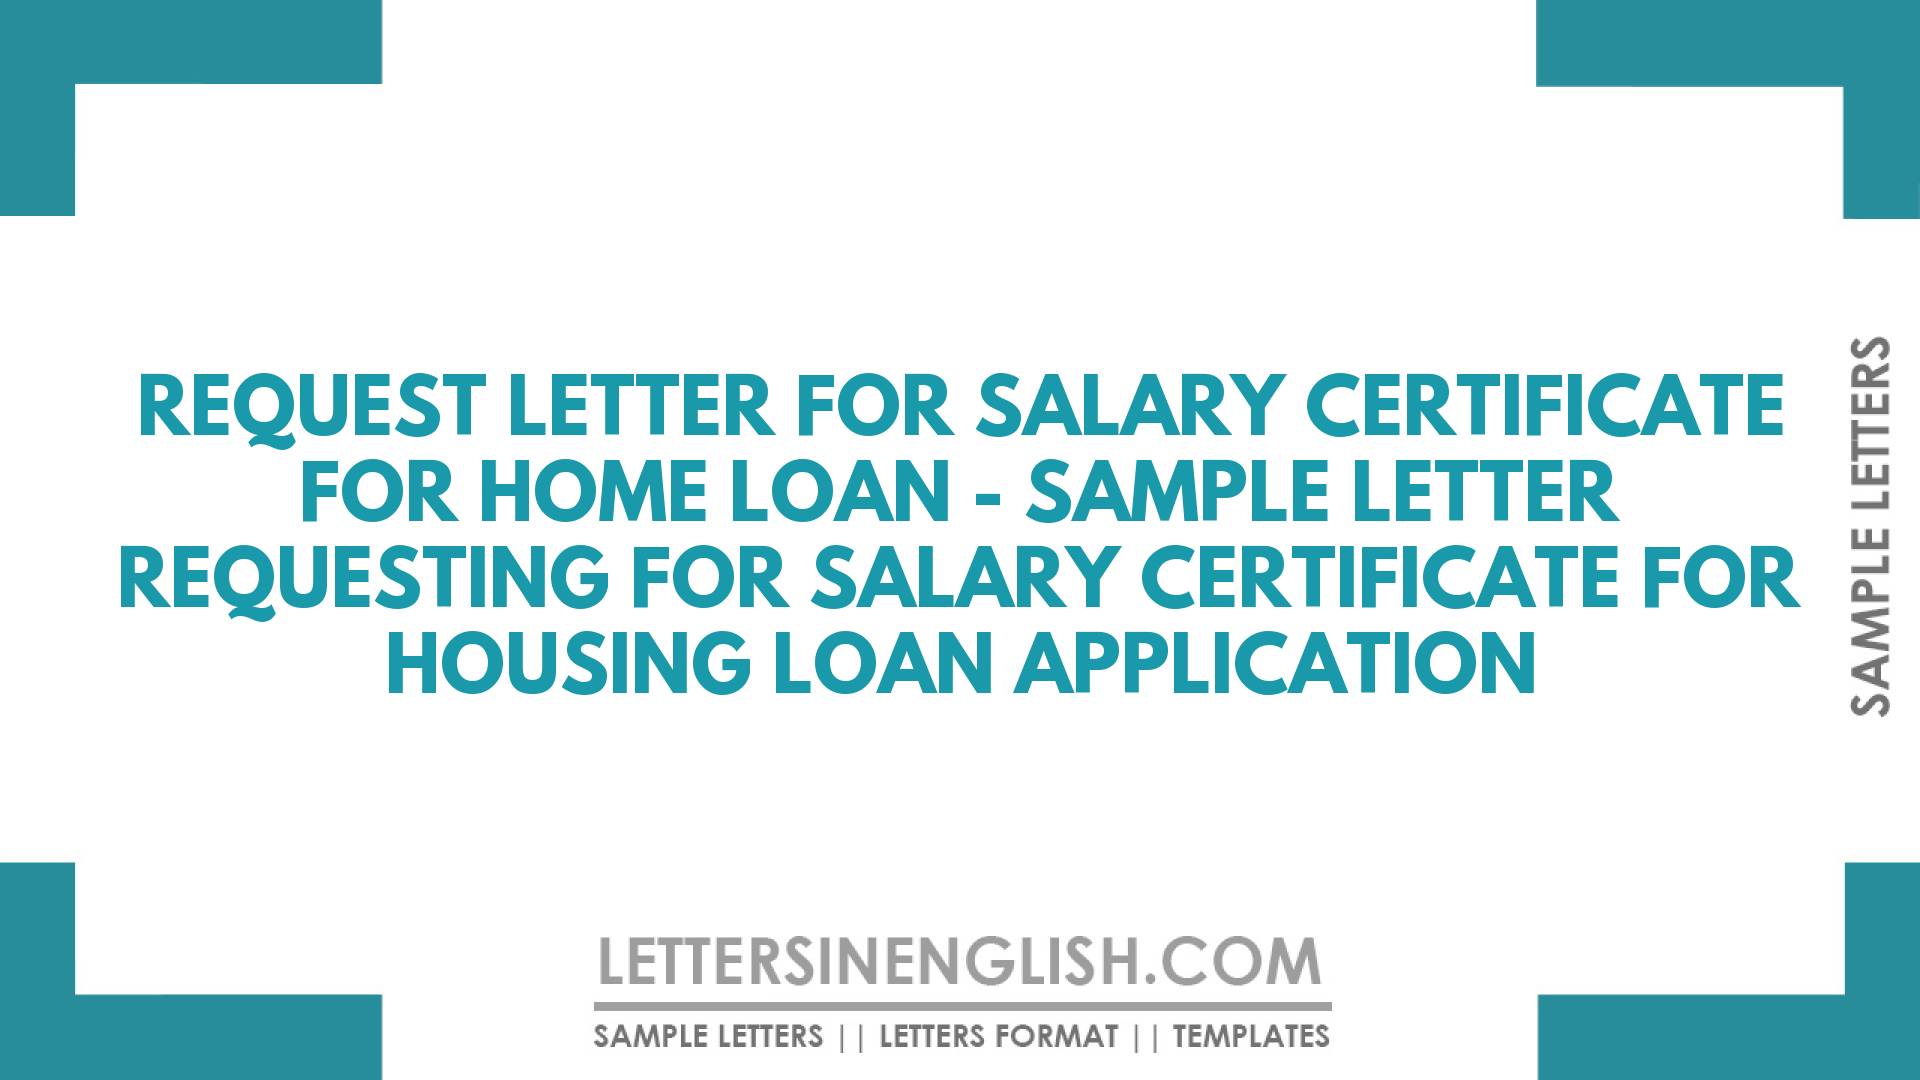 Request Letter for Salary Certificate for Home Loan – Sample Letter Requesting for Salary Certificate for Housing Loan Application